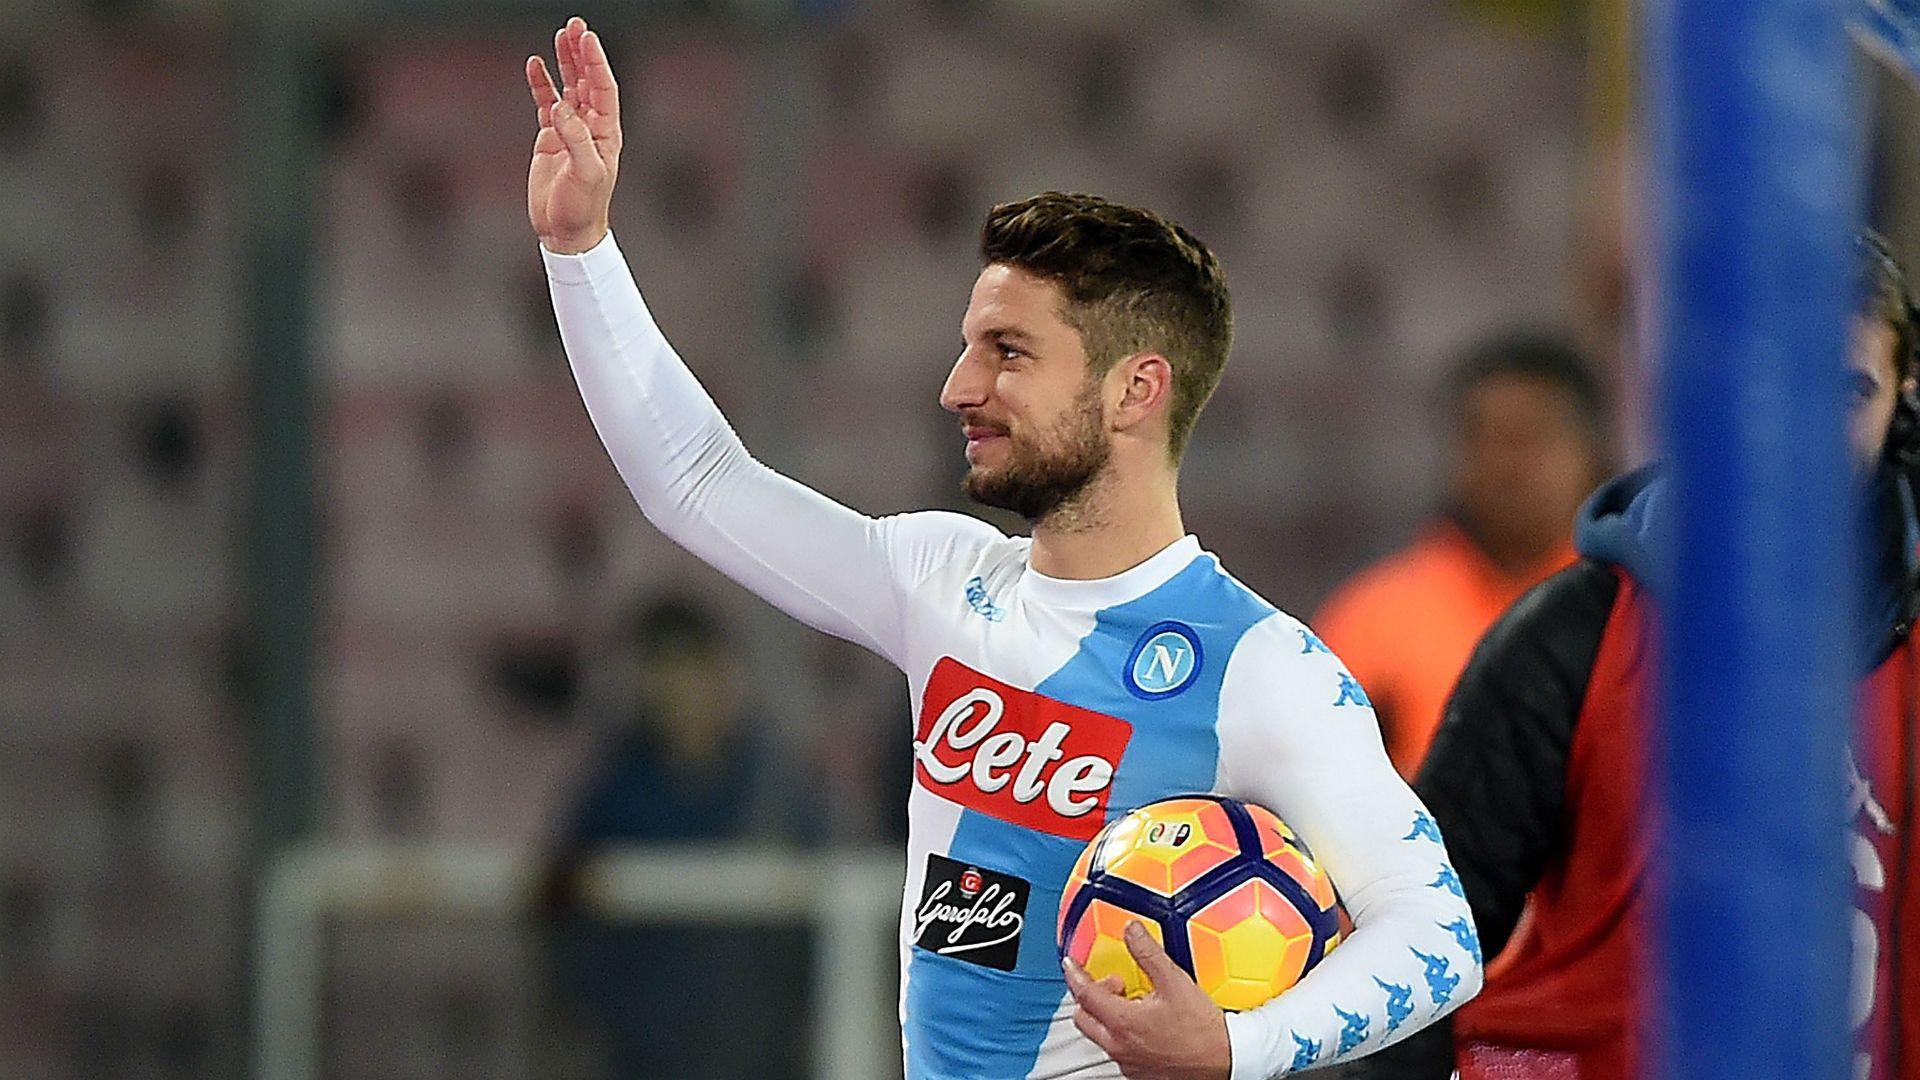 Football. What you might have missed: Mertens on fire for Napoli